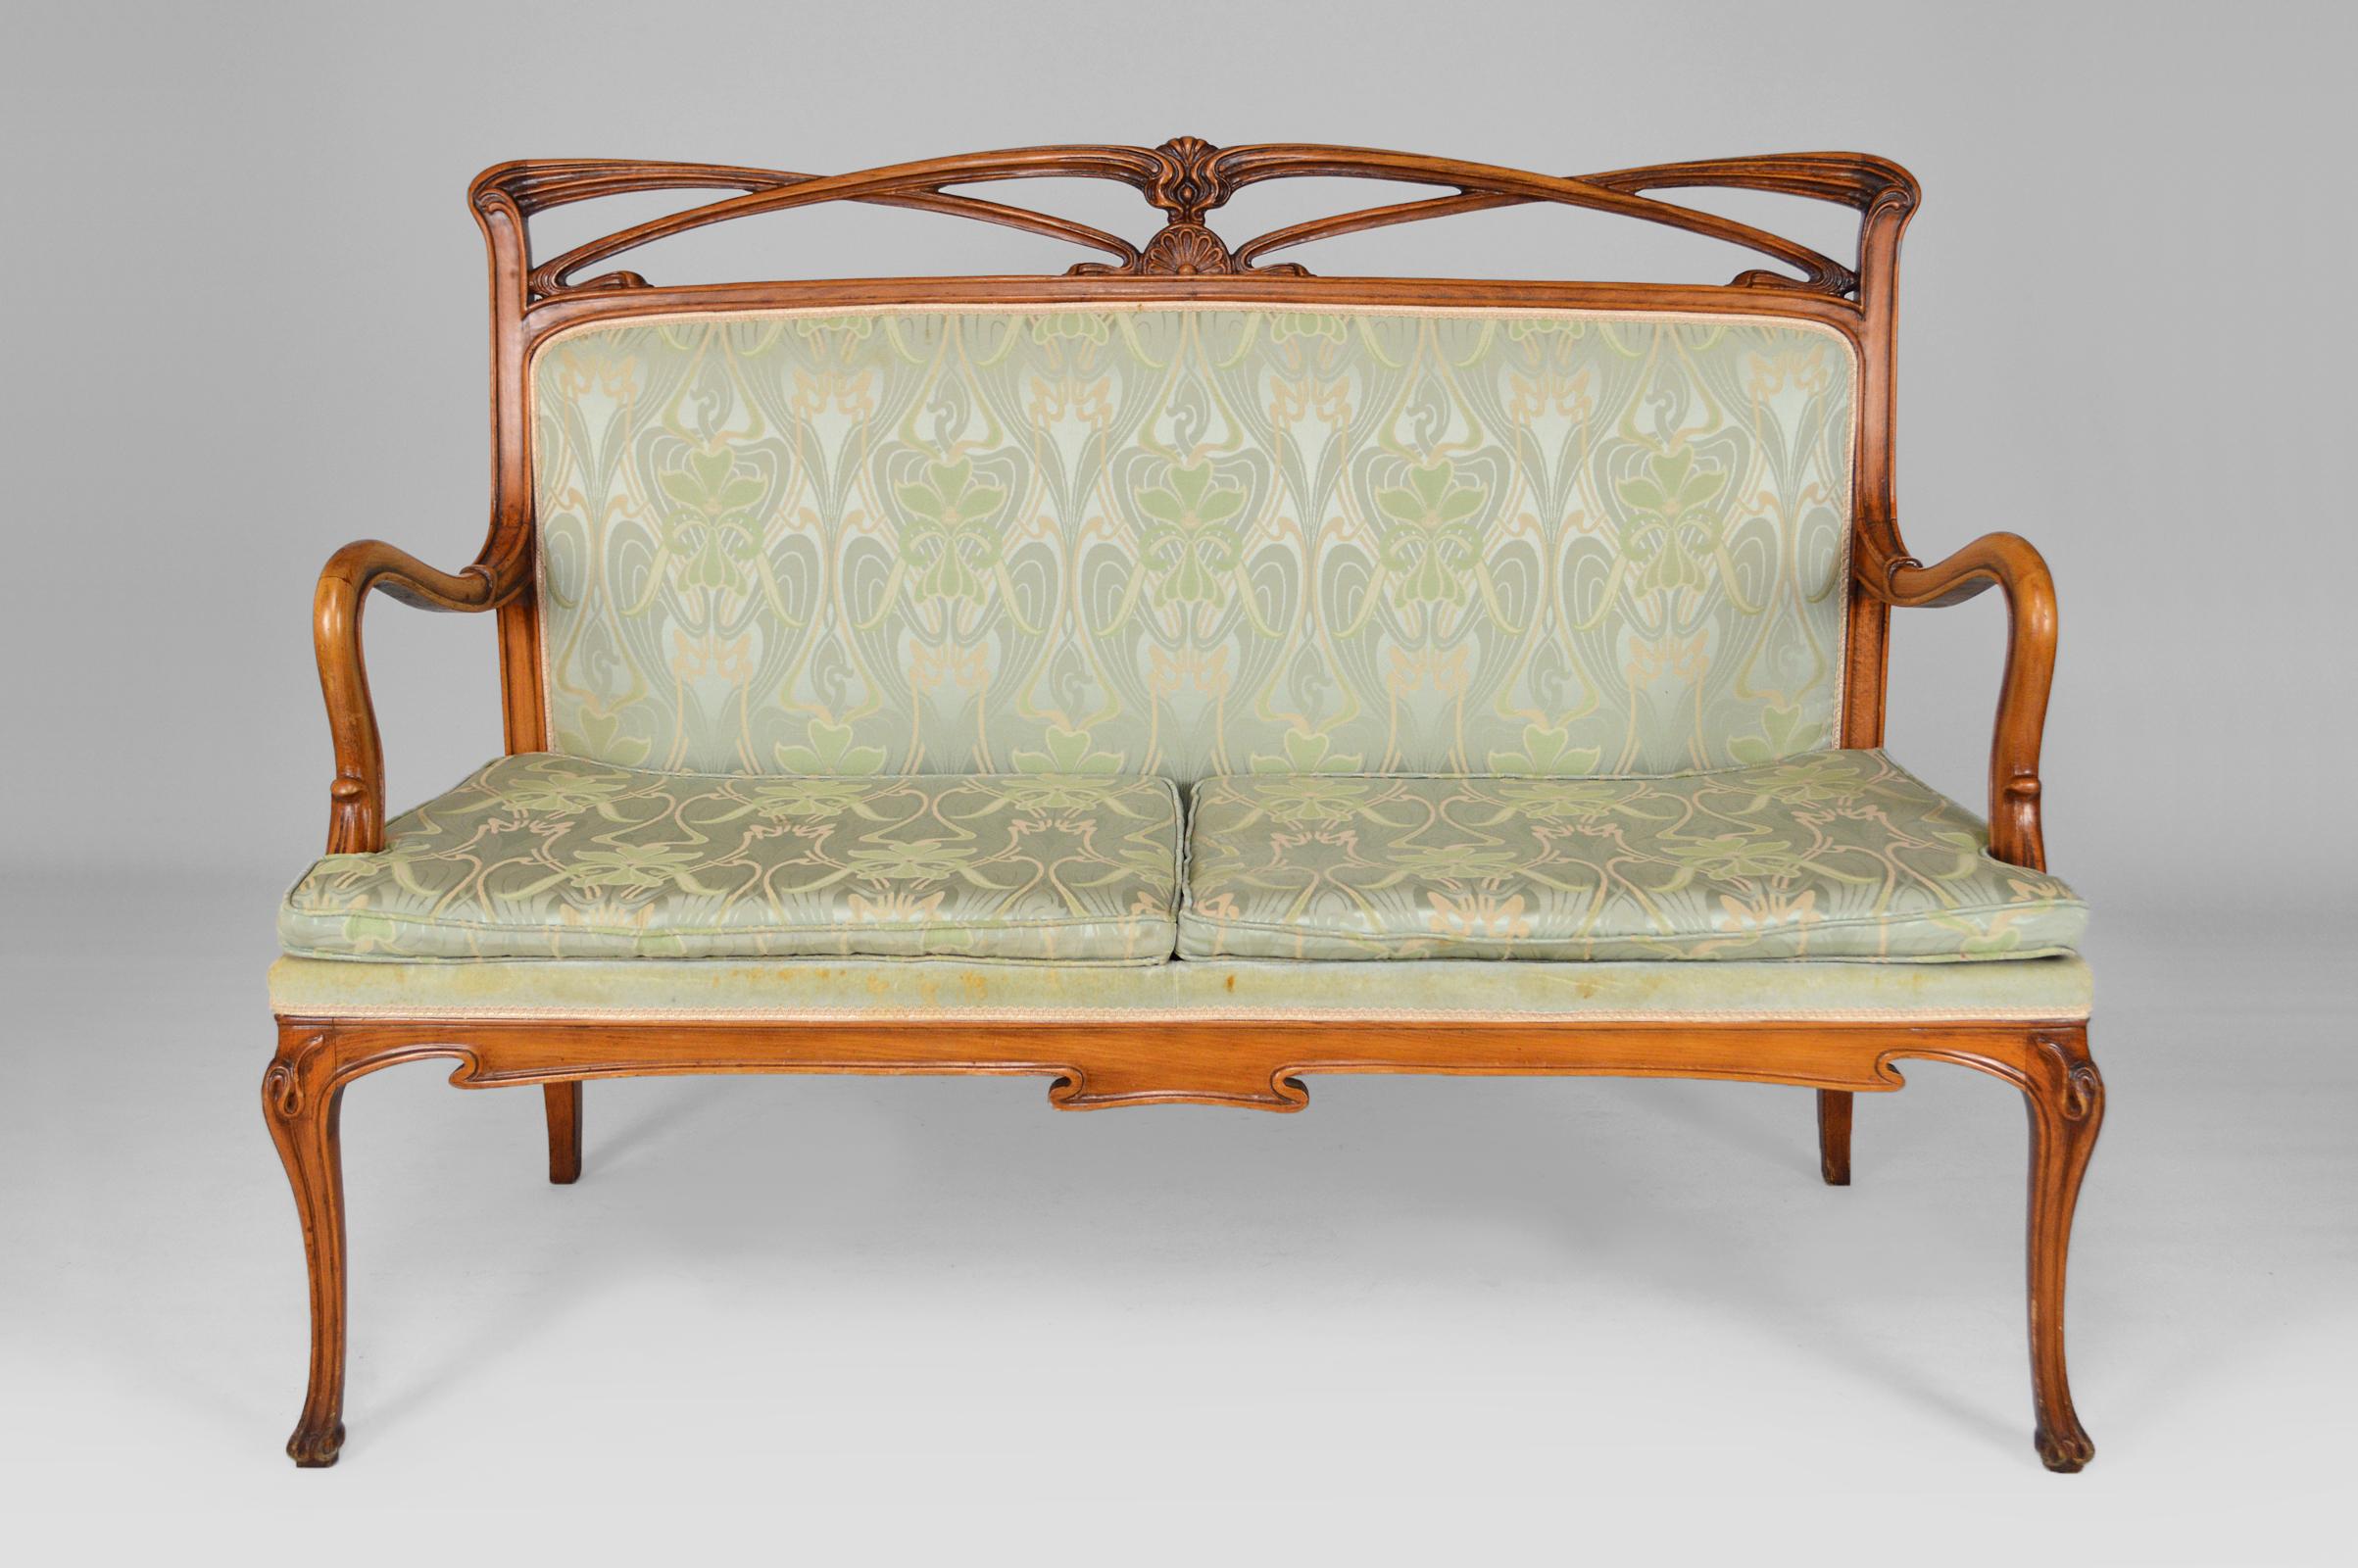 Superb salon set of 4 pieces in carved wood:

- 1 sofa / bench: 100 x 138 x 65 cm
- 2 armchairs: 100 x 61 x 63 cm
- 1 coffee table: 52 x 65 x 63 cm

Art Nouveau.
France, circa 1900.

In very good condition, the fabric is in good condition,